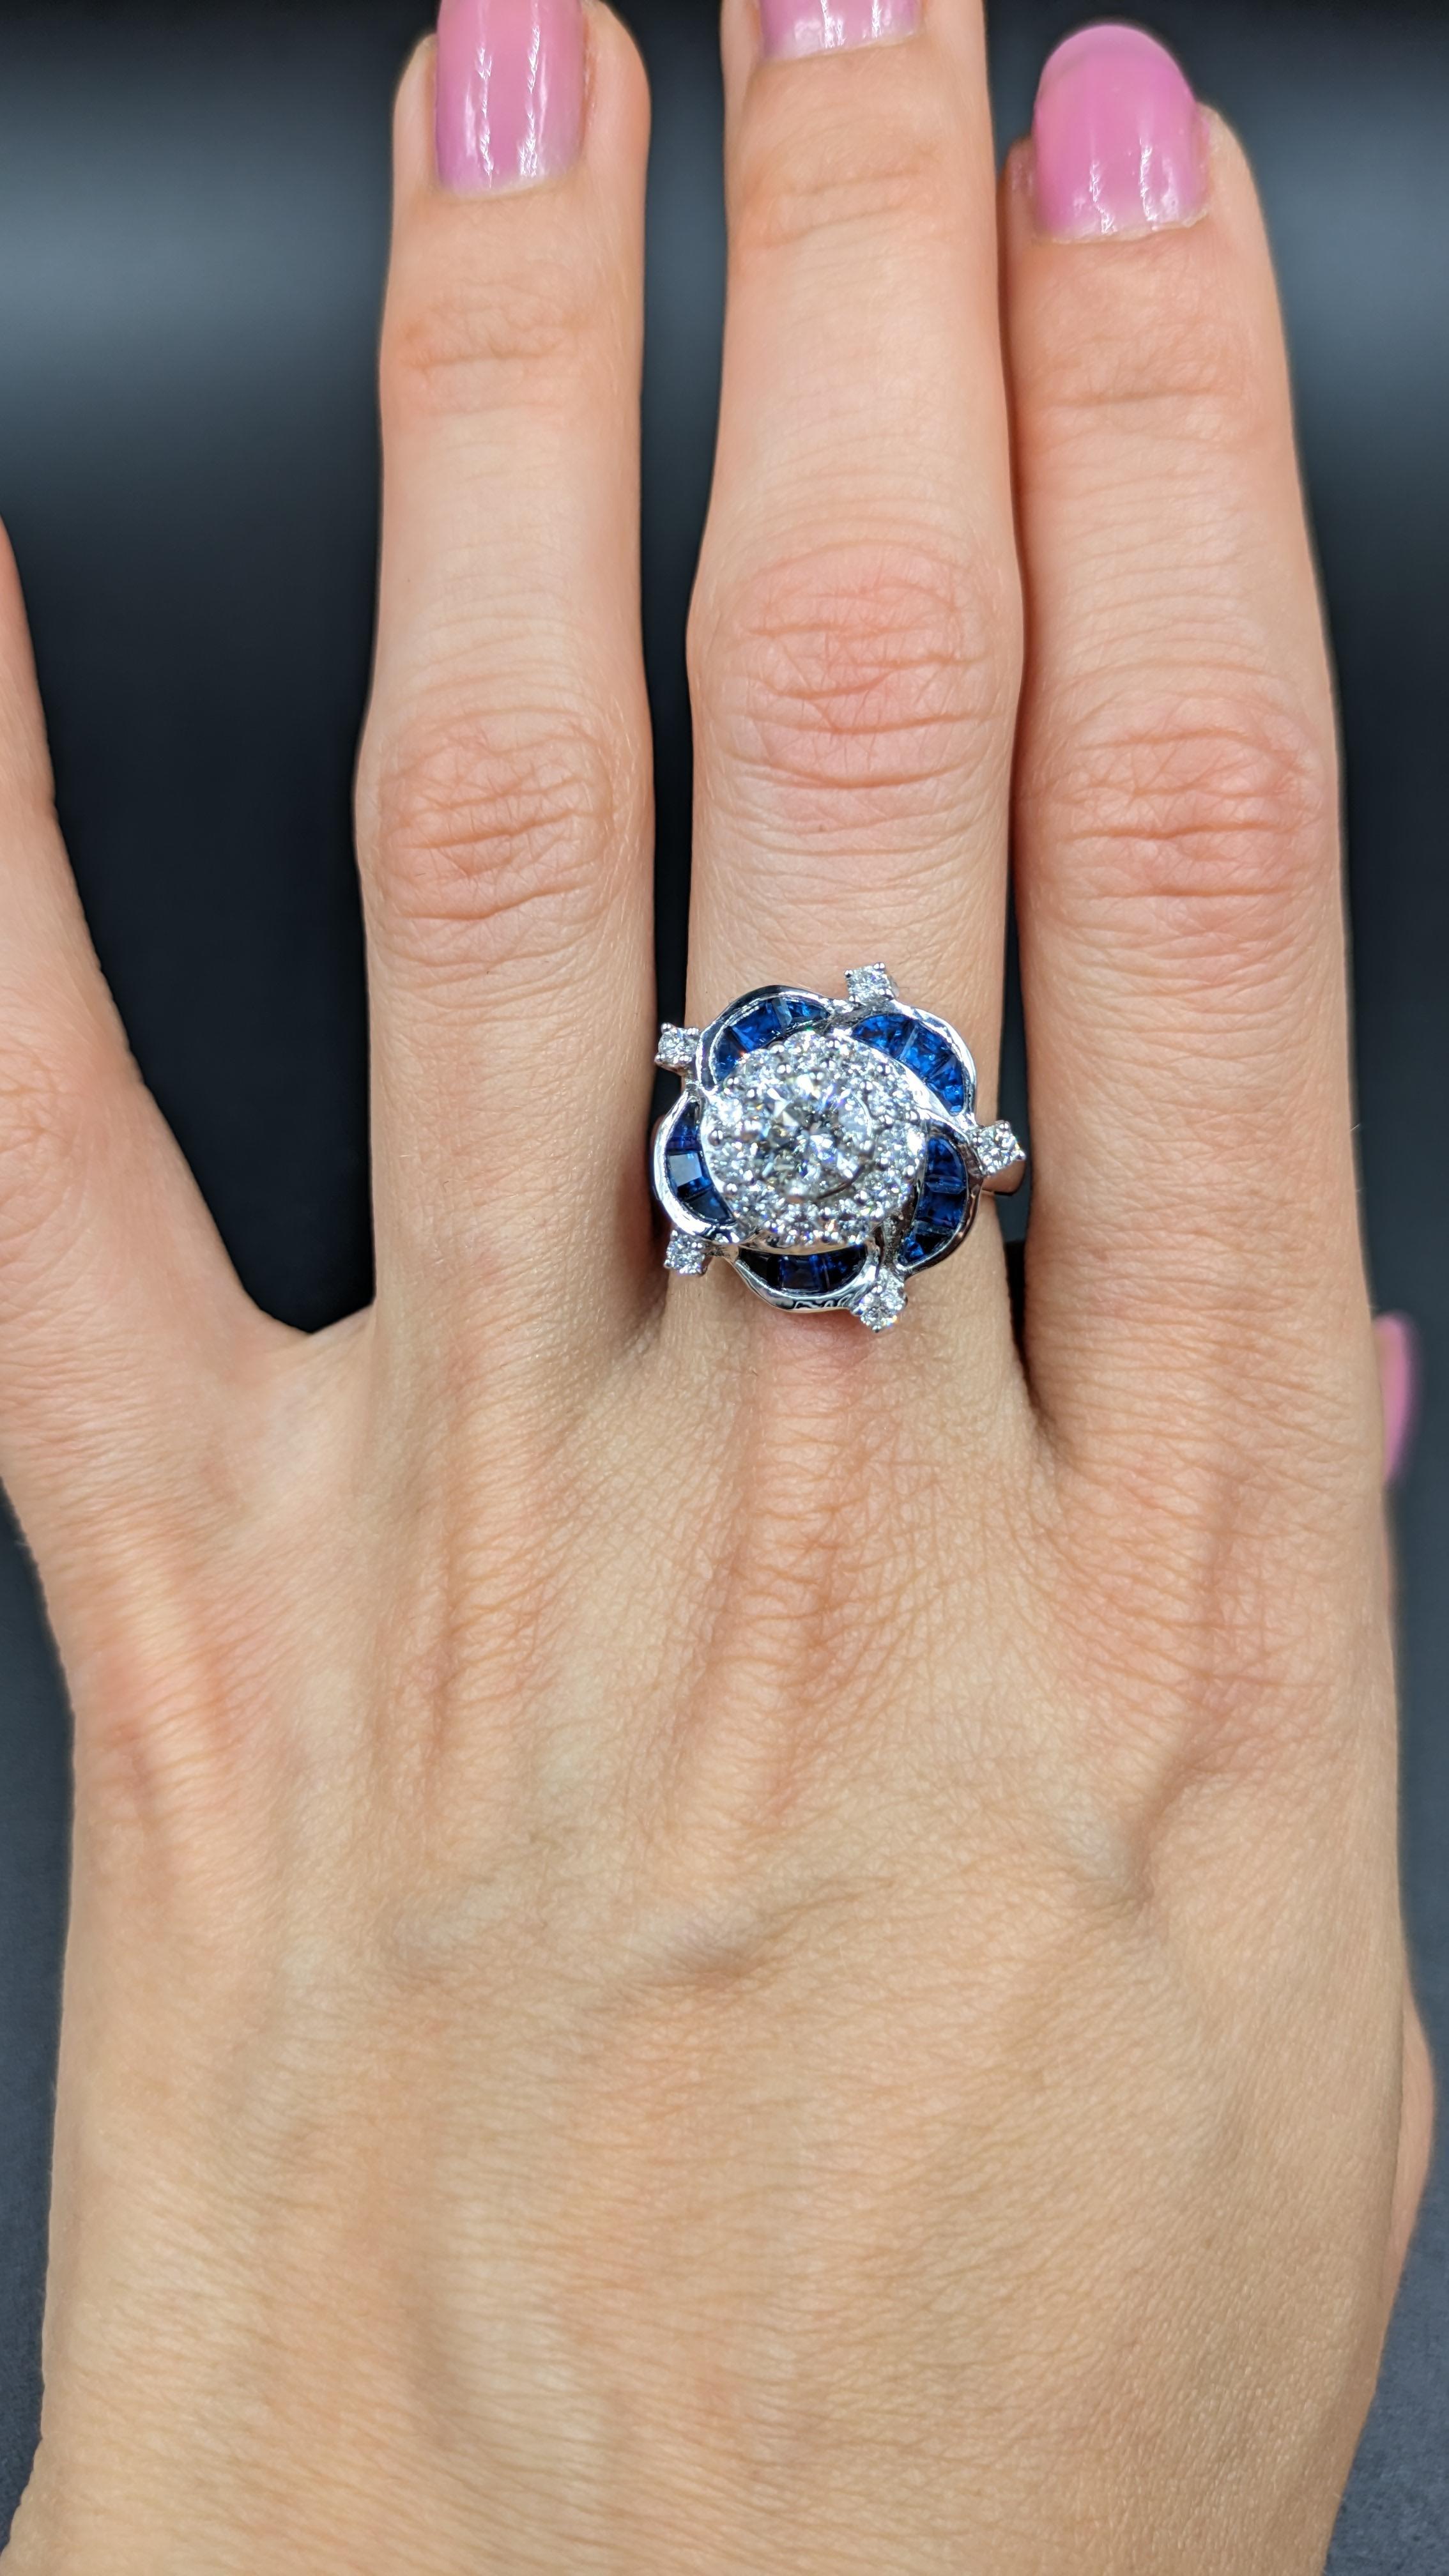 Women's 1.56 Carat Diamond and Sapphire Cluster Ring For Sale